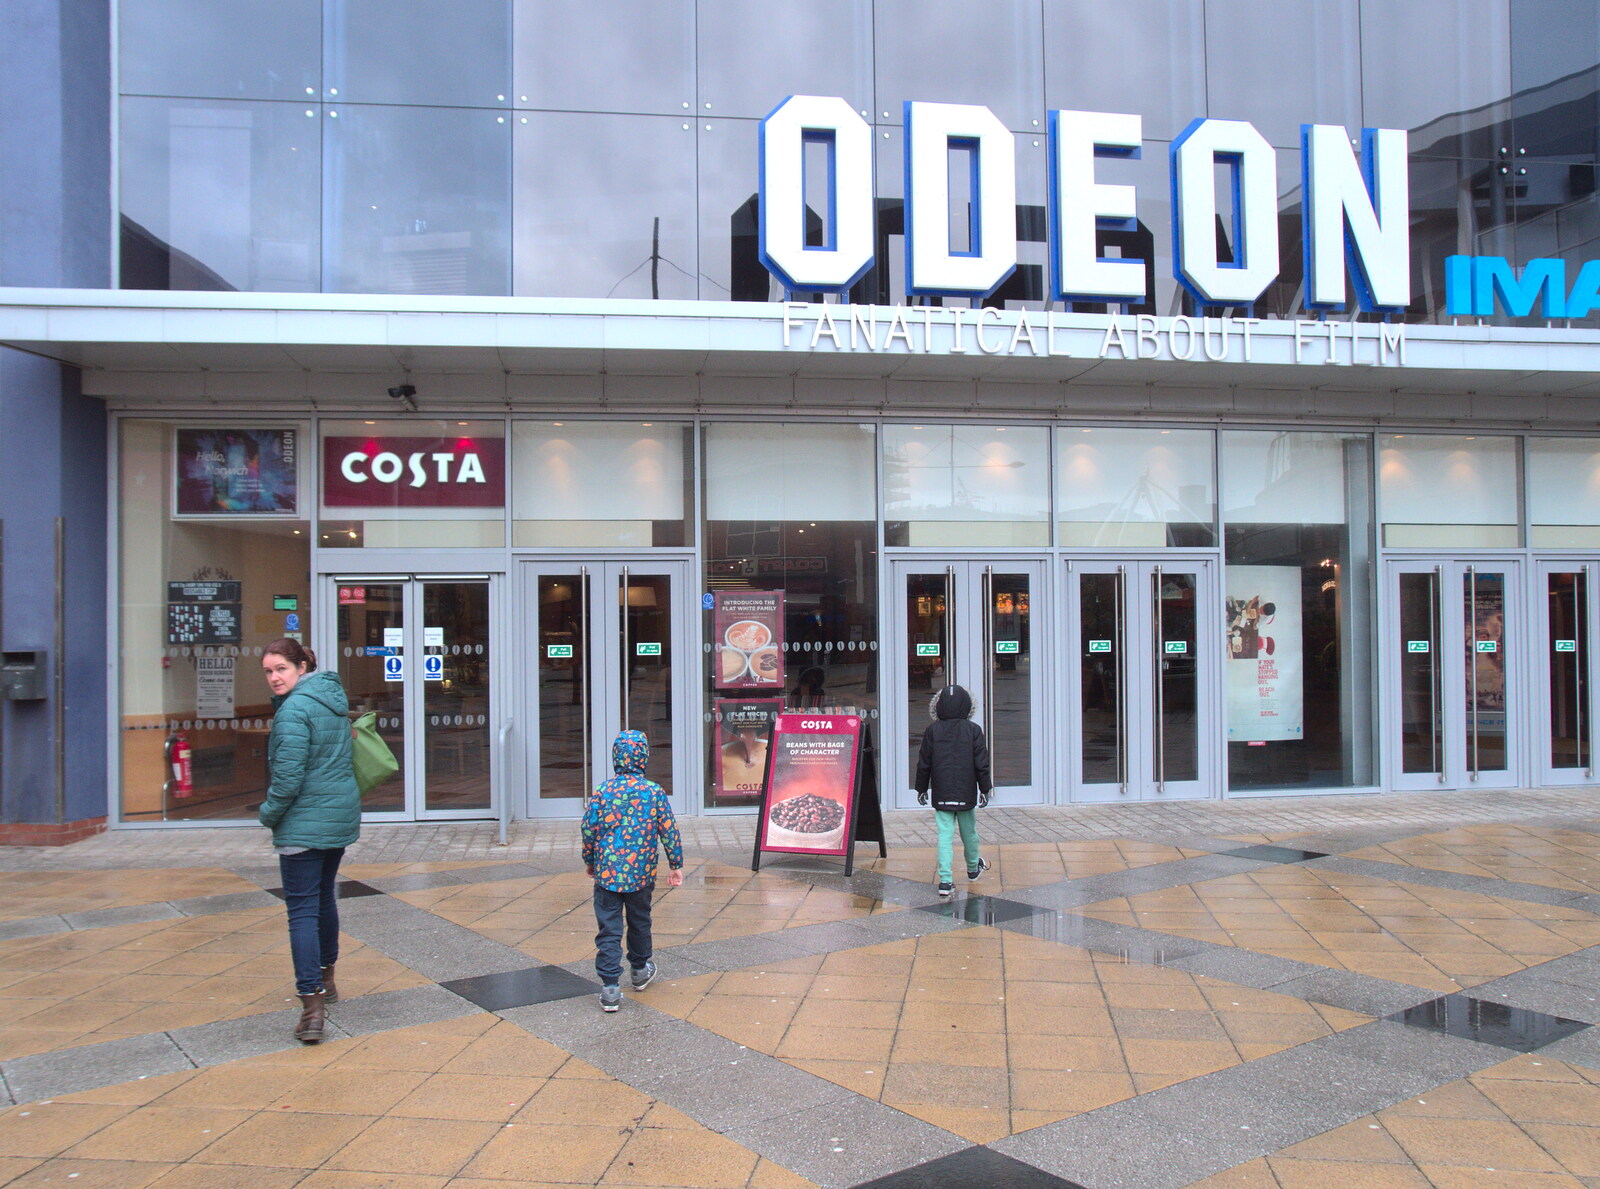 The gang heads into the Odeon cinema from A Couple of Trips to Norwich, Norfolk - 31st March 2018